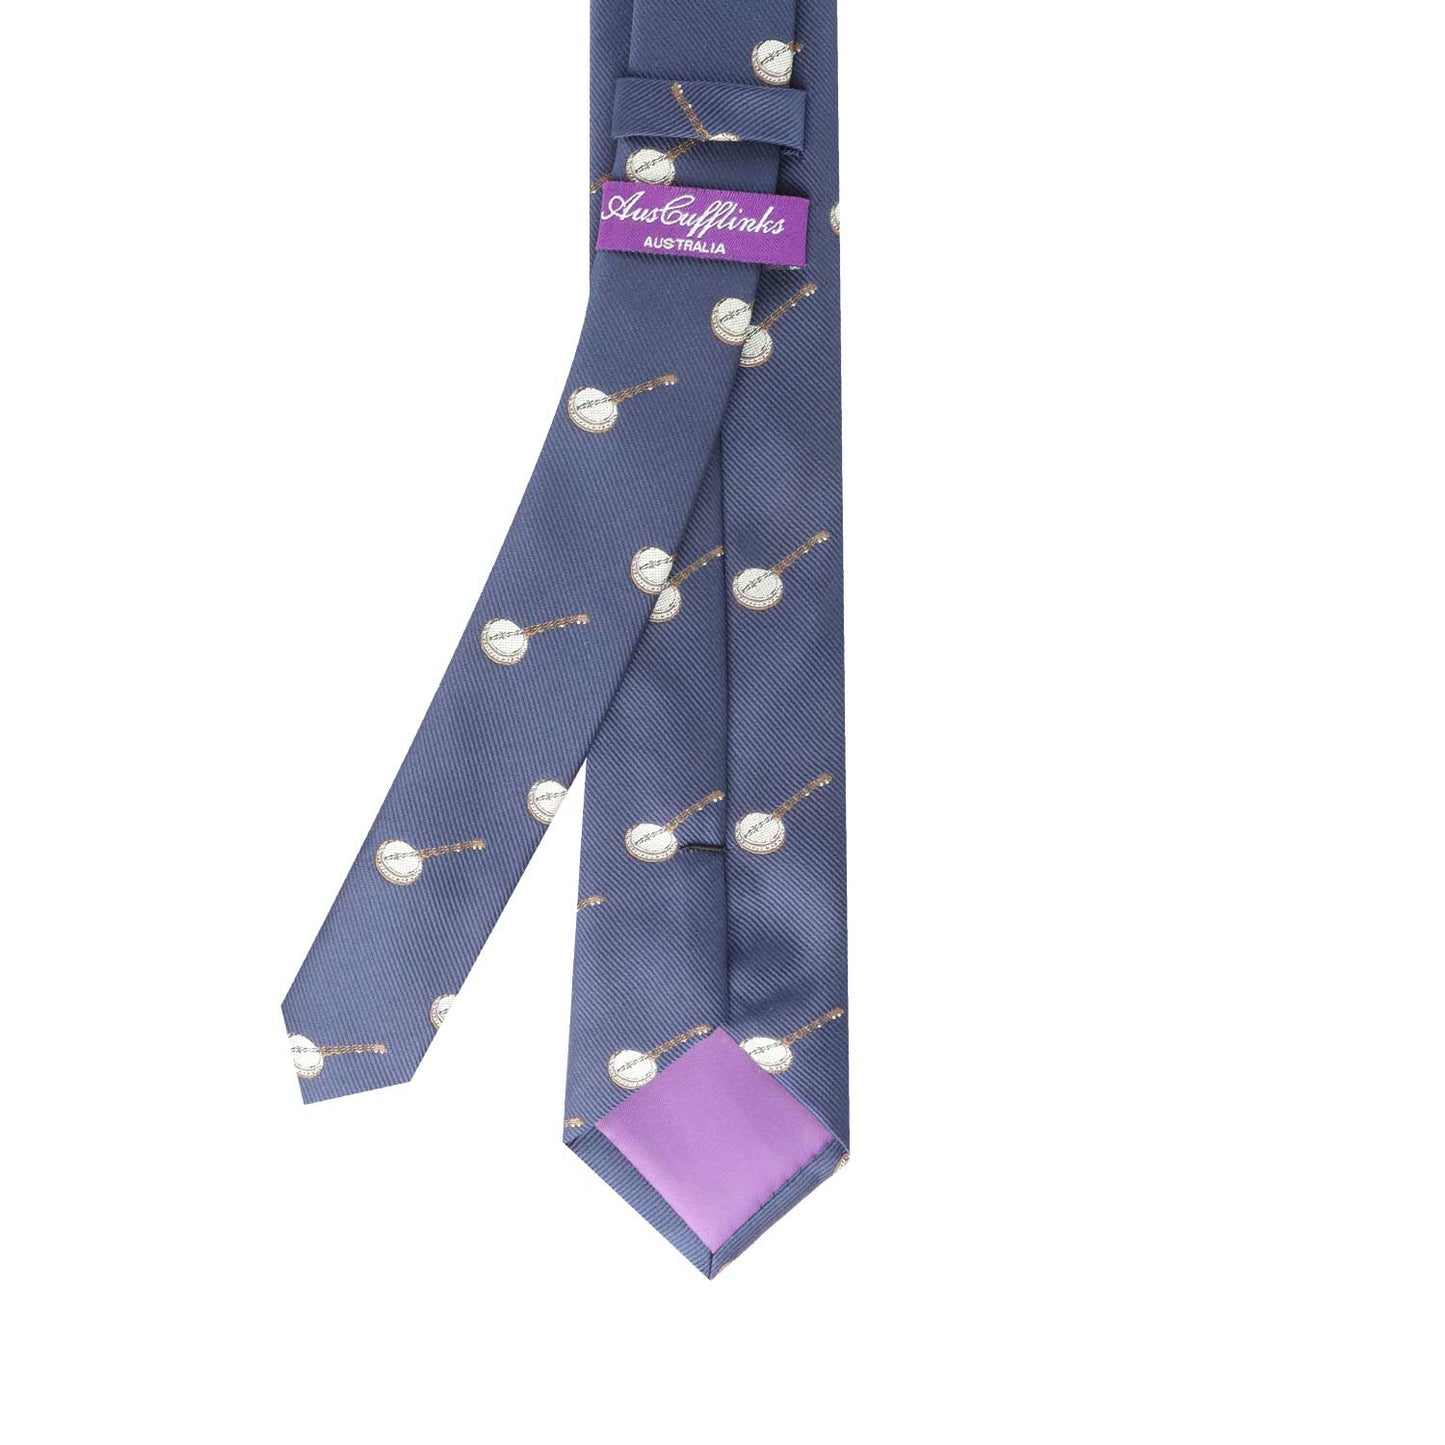 A Banjo Skinny Tie with a baseball design on it, adding a touch of sophistication.